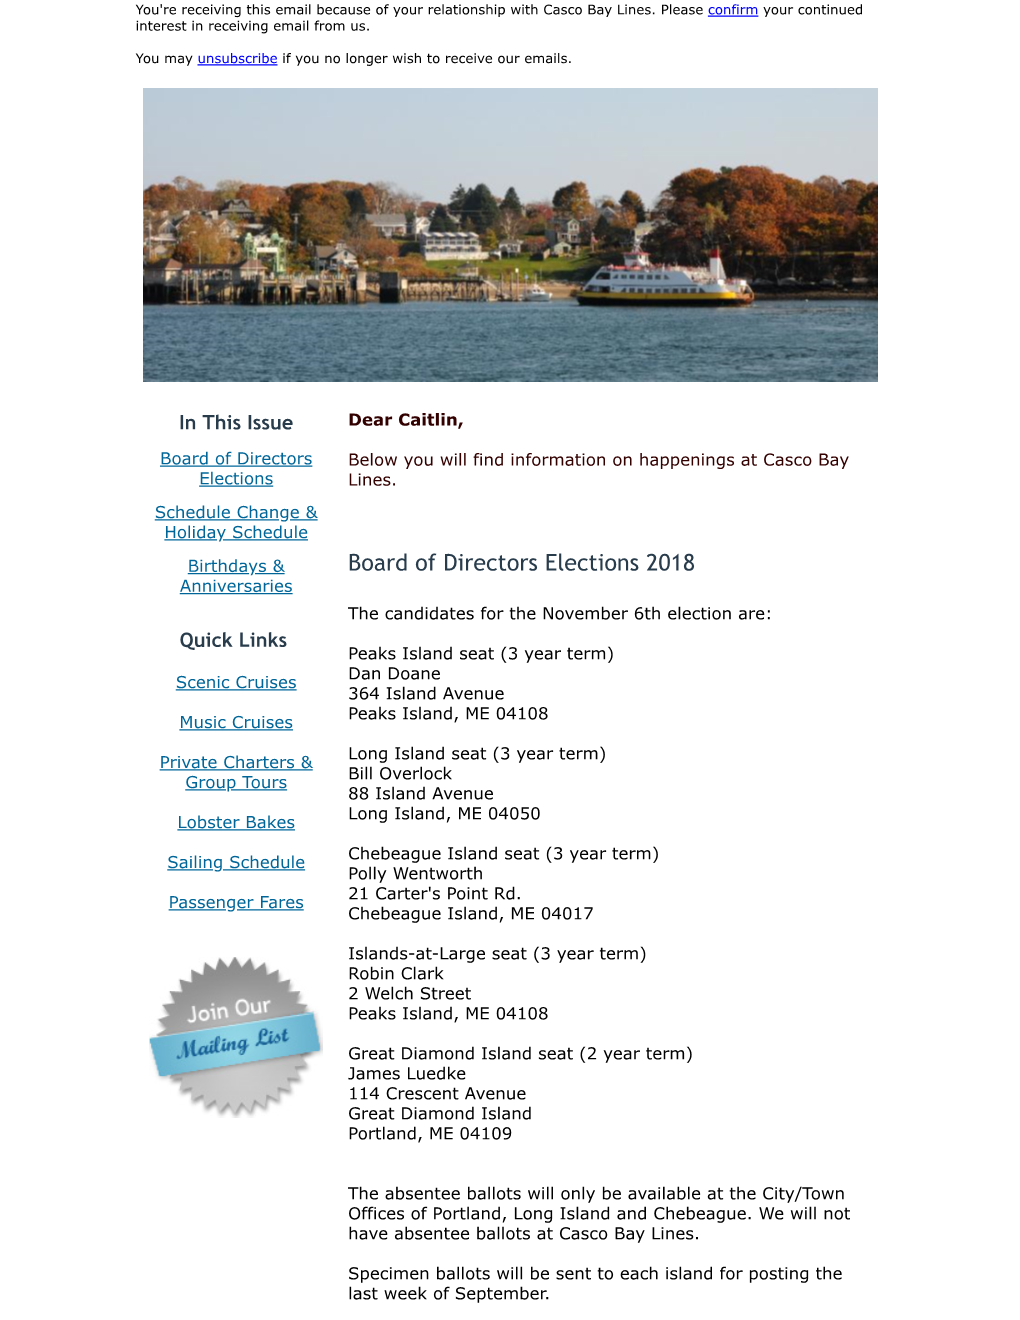 Board of Directors Elections 2018 Anniversaries the Candidates for the November 6Th Election Are: Quick Links Peaks Island Seat (3 Year Term)